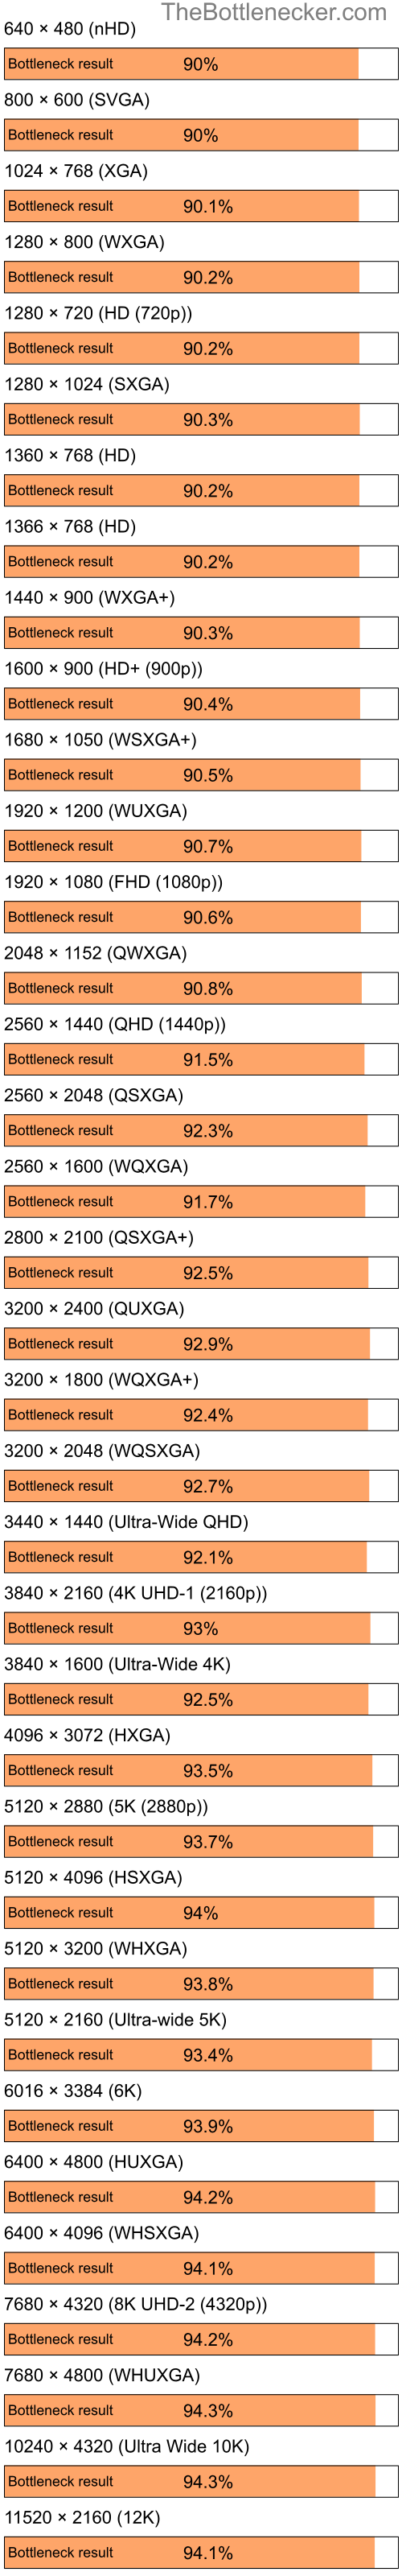 Bottleneck results by resolution for Intel Pentium 4 and NVIDIA GeForce4 MX ith AGP8X in General Tasks